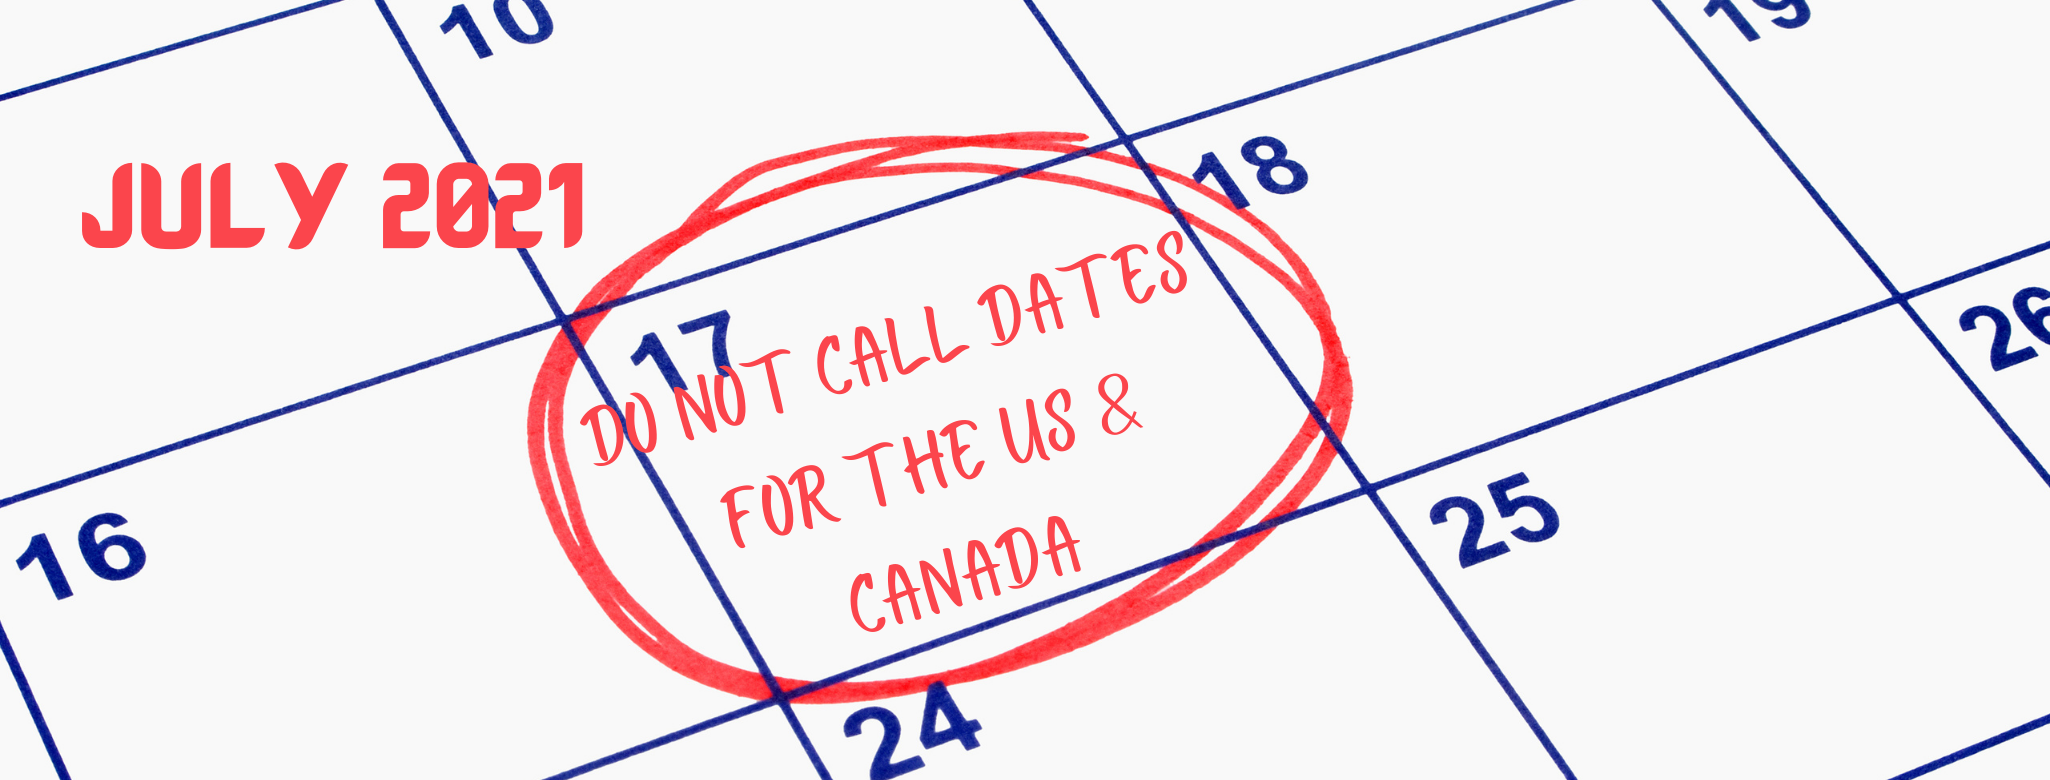 July 2021 Do Not Call Dates For The US & Canada